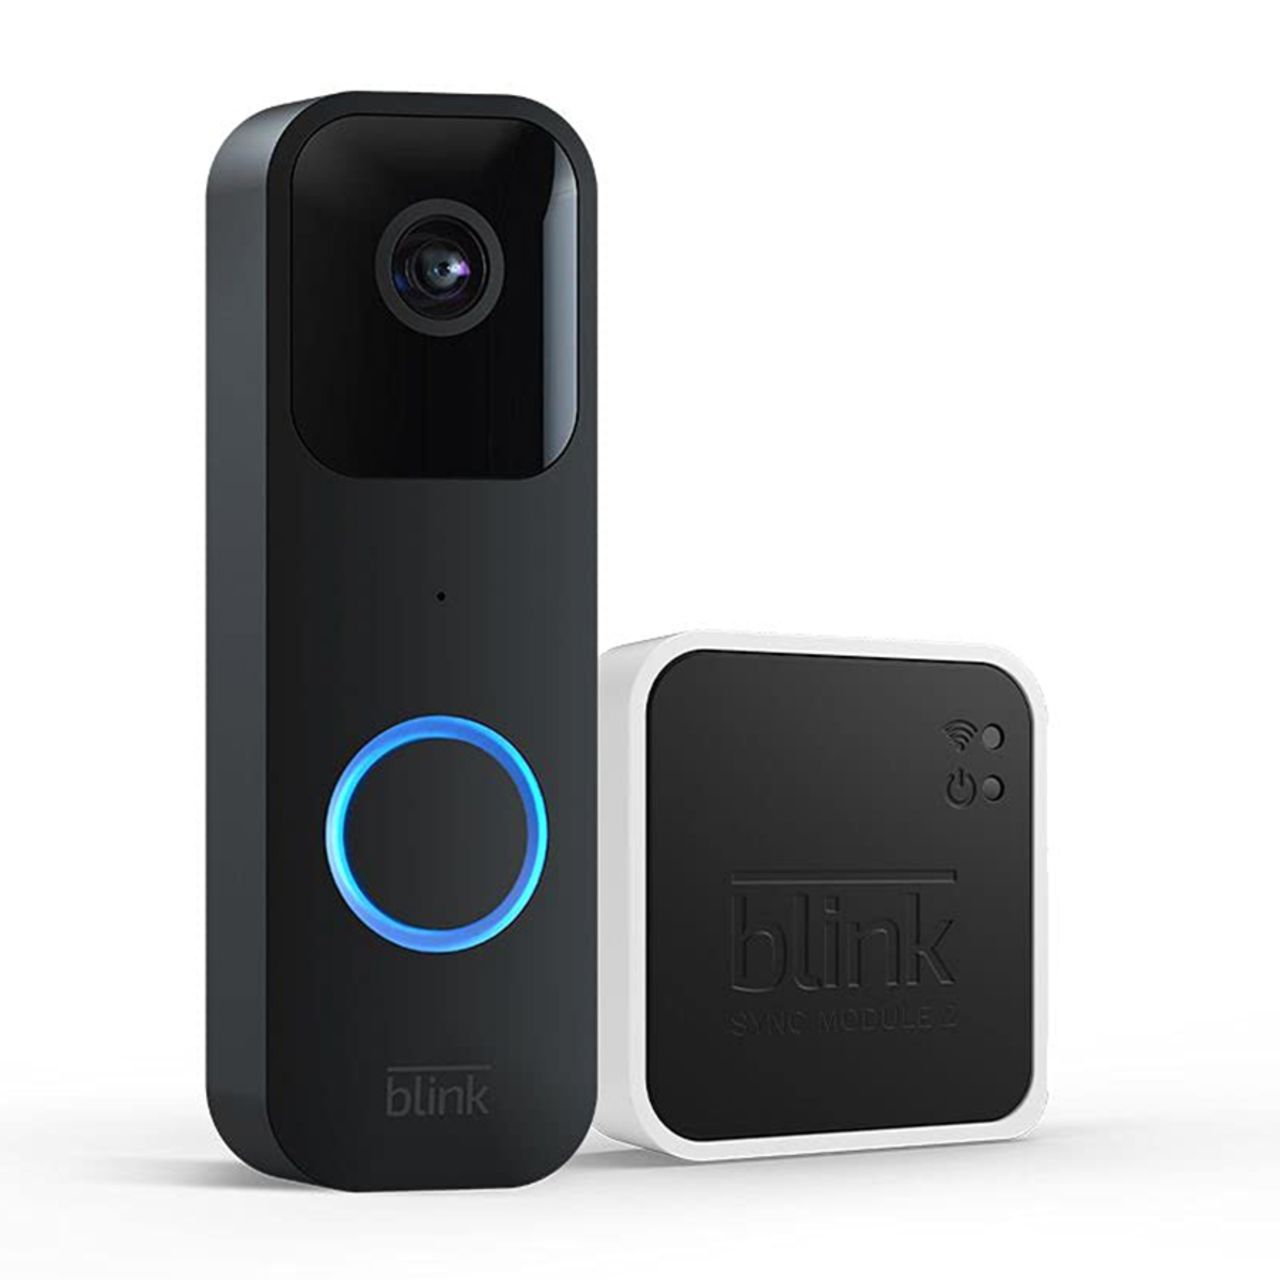 Roku Video Doorbell review: Here's what $80 gets you